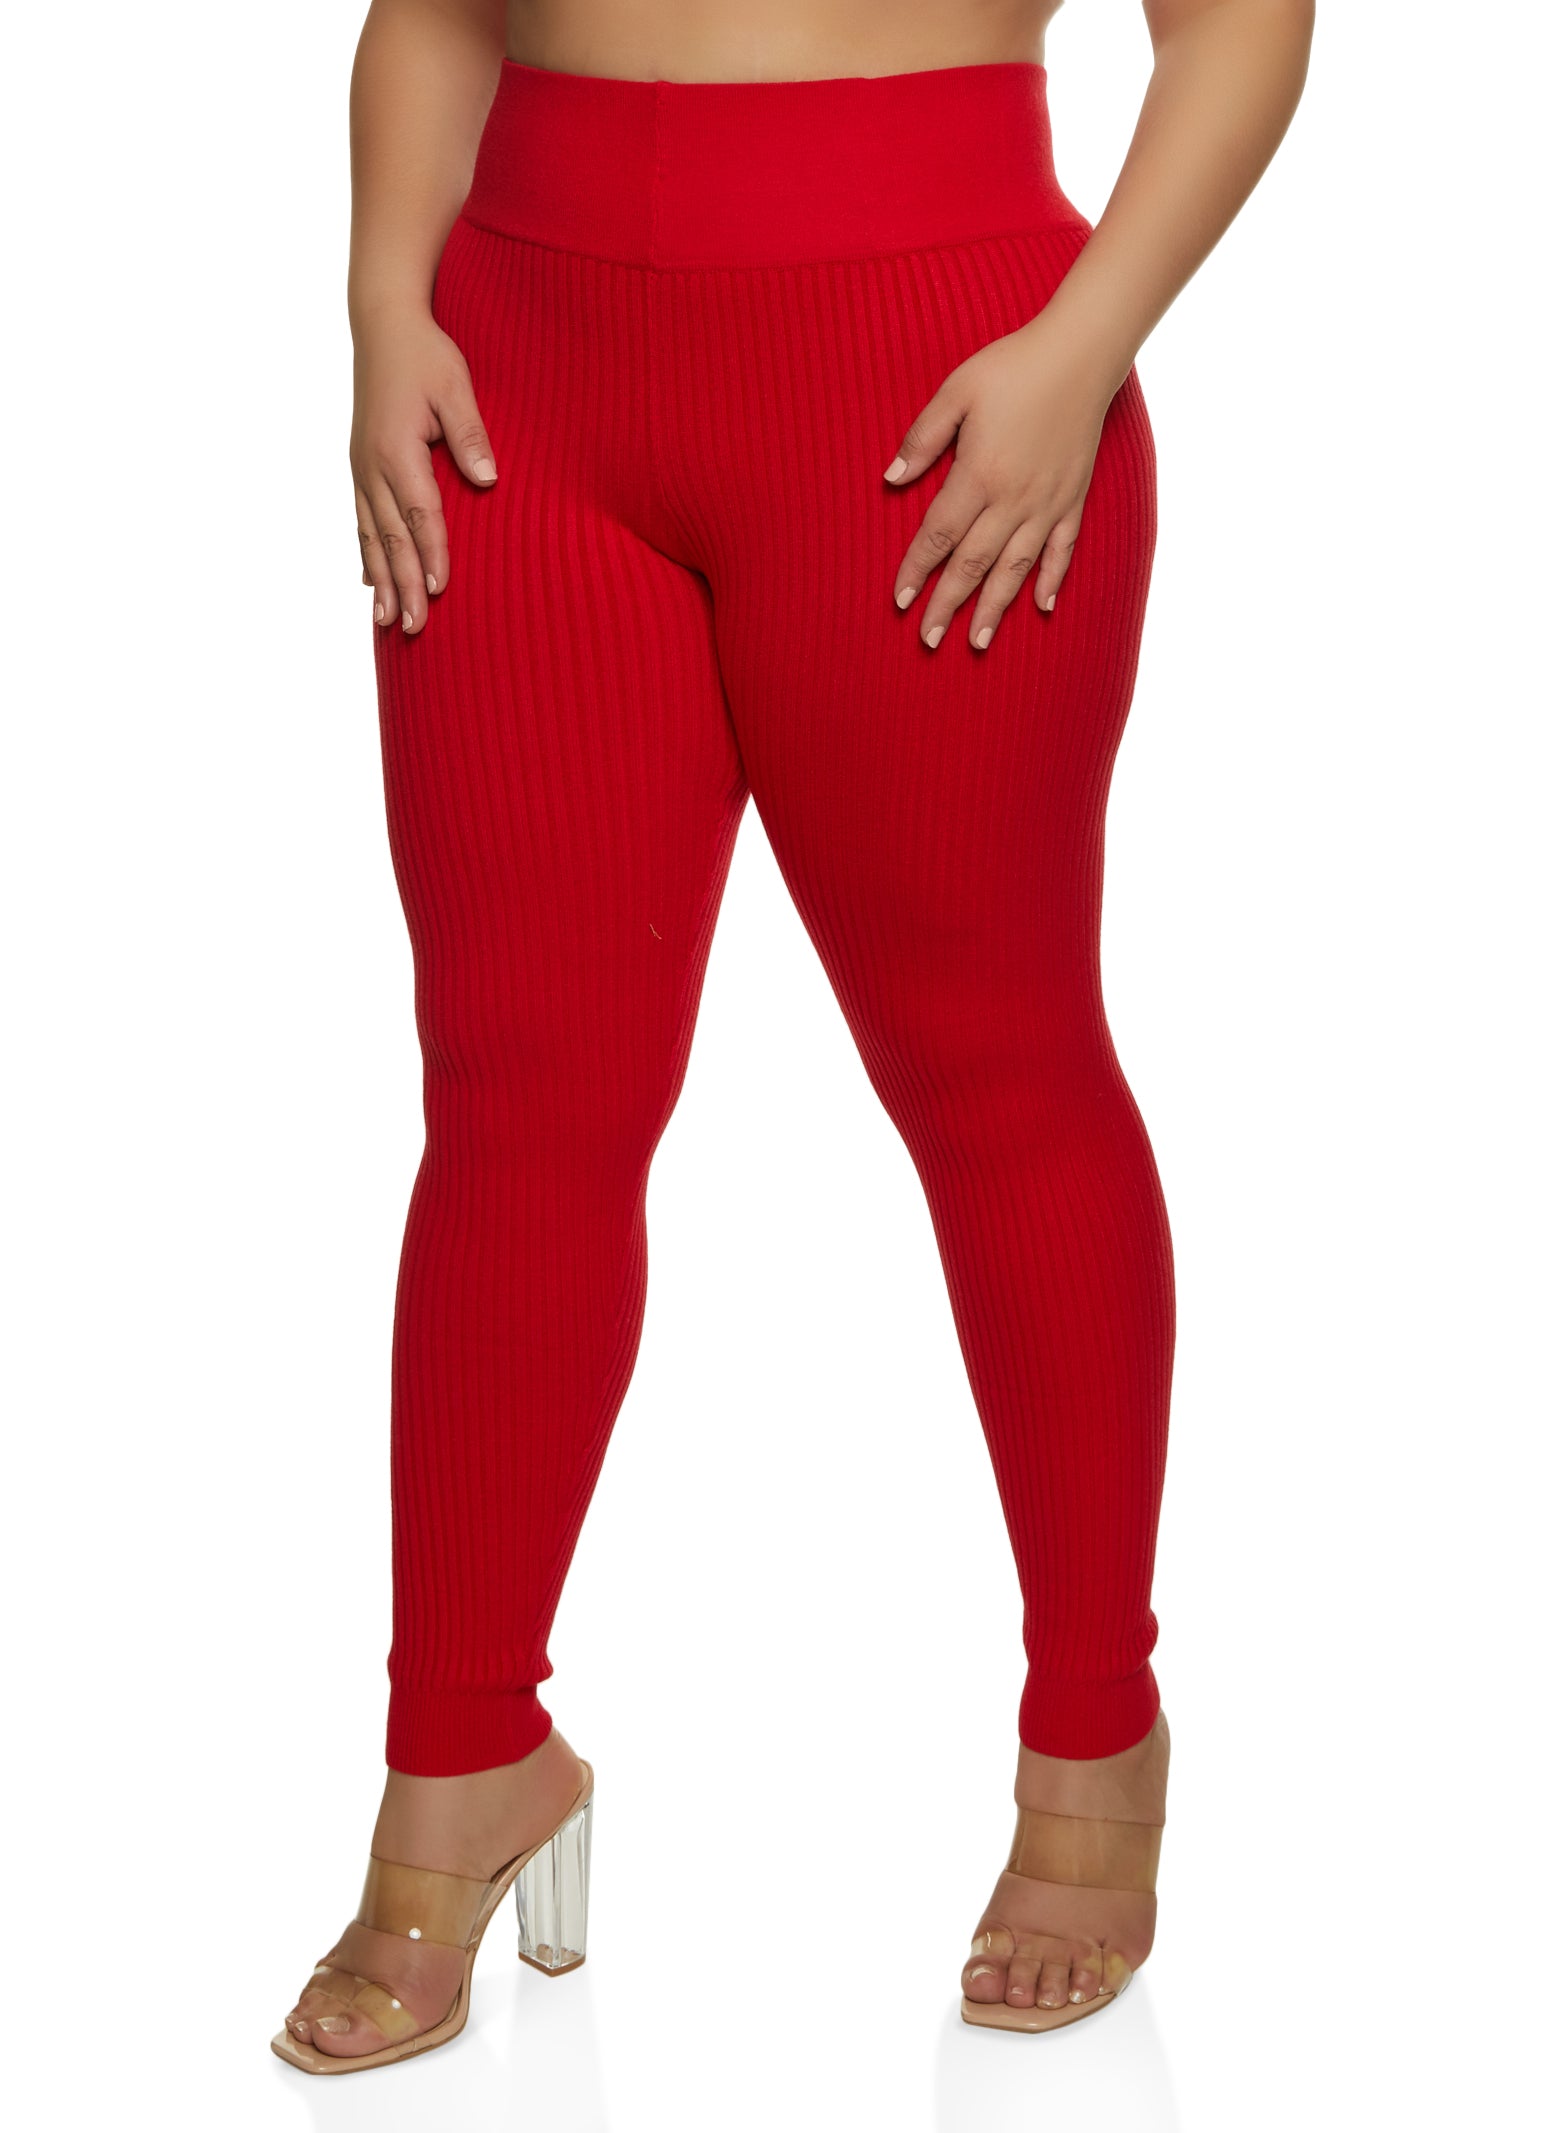 Plus Size Red Tights & Leggings.